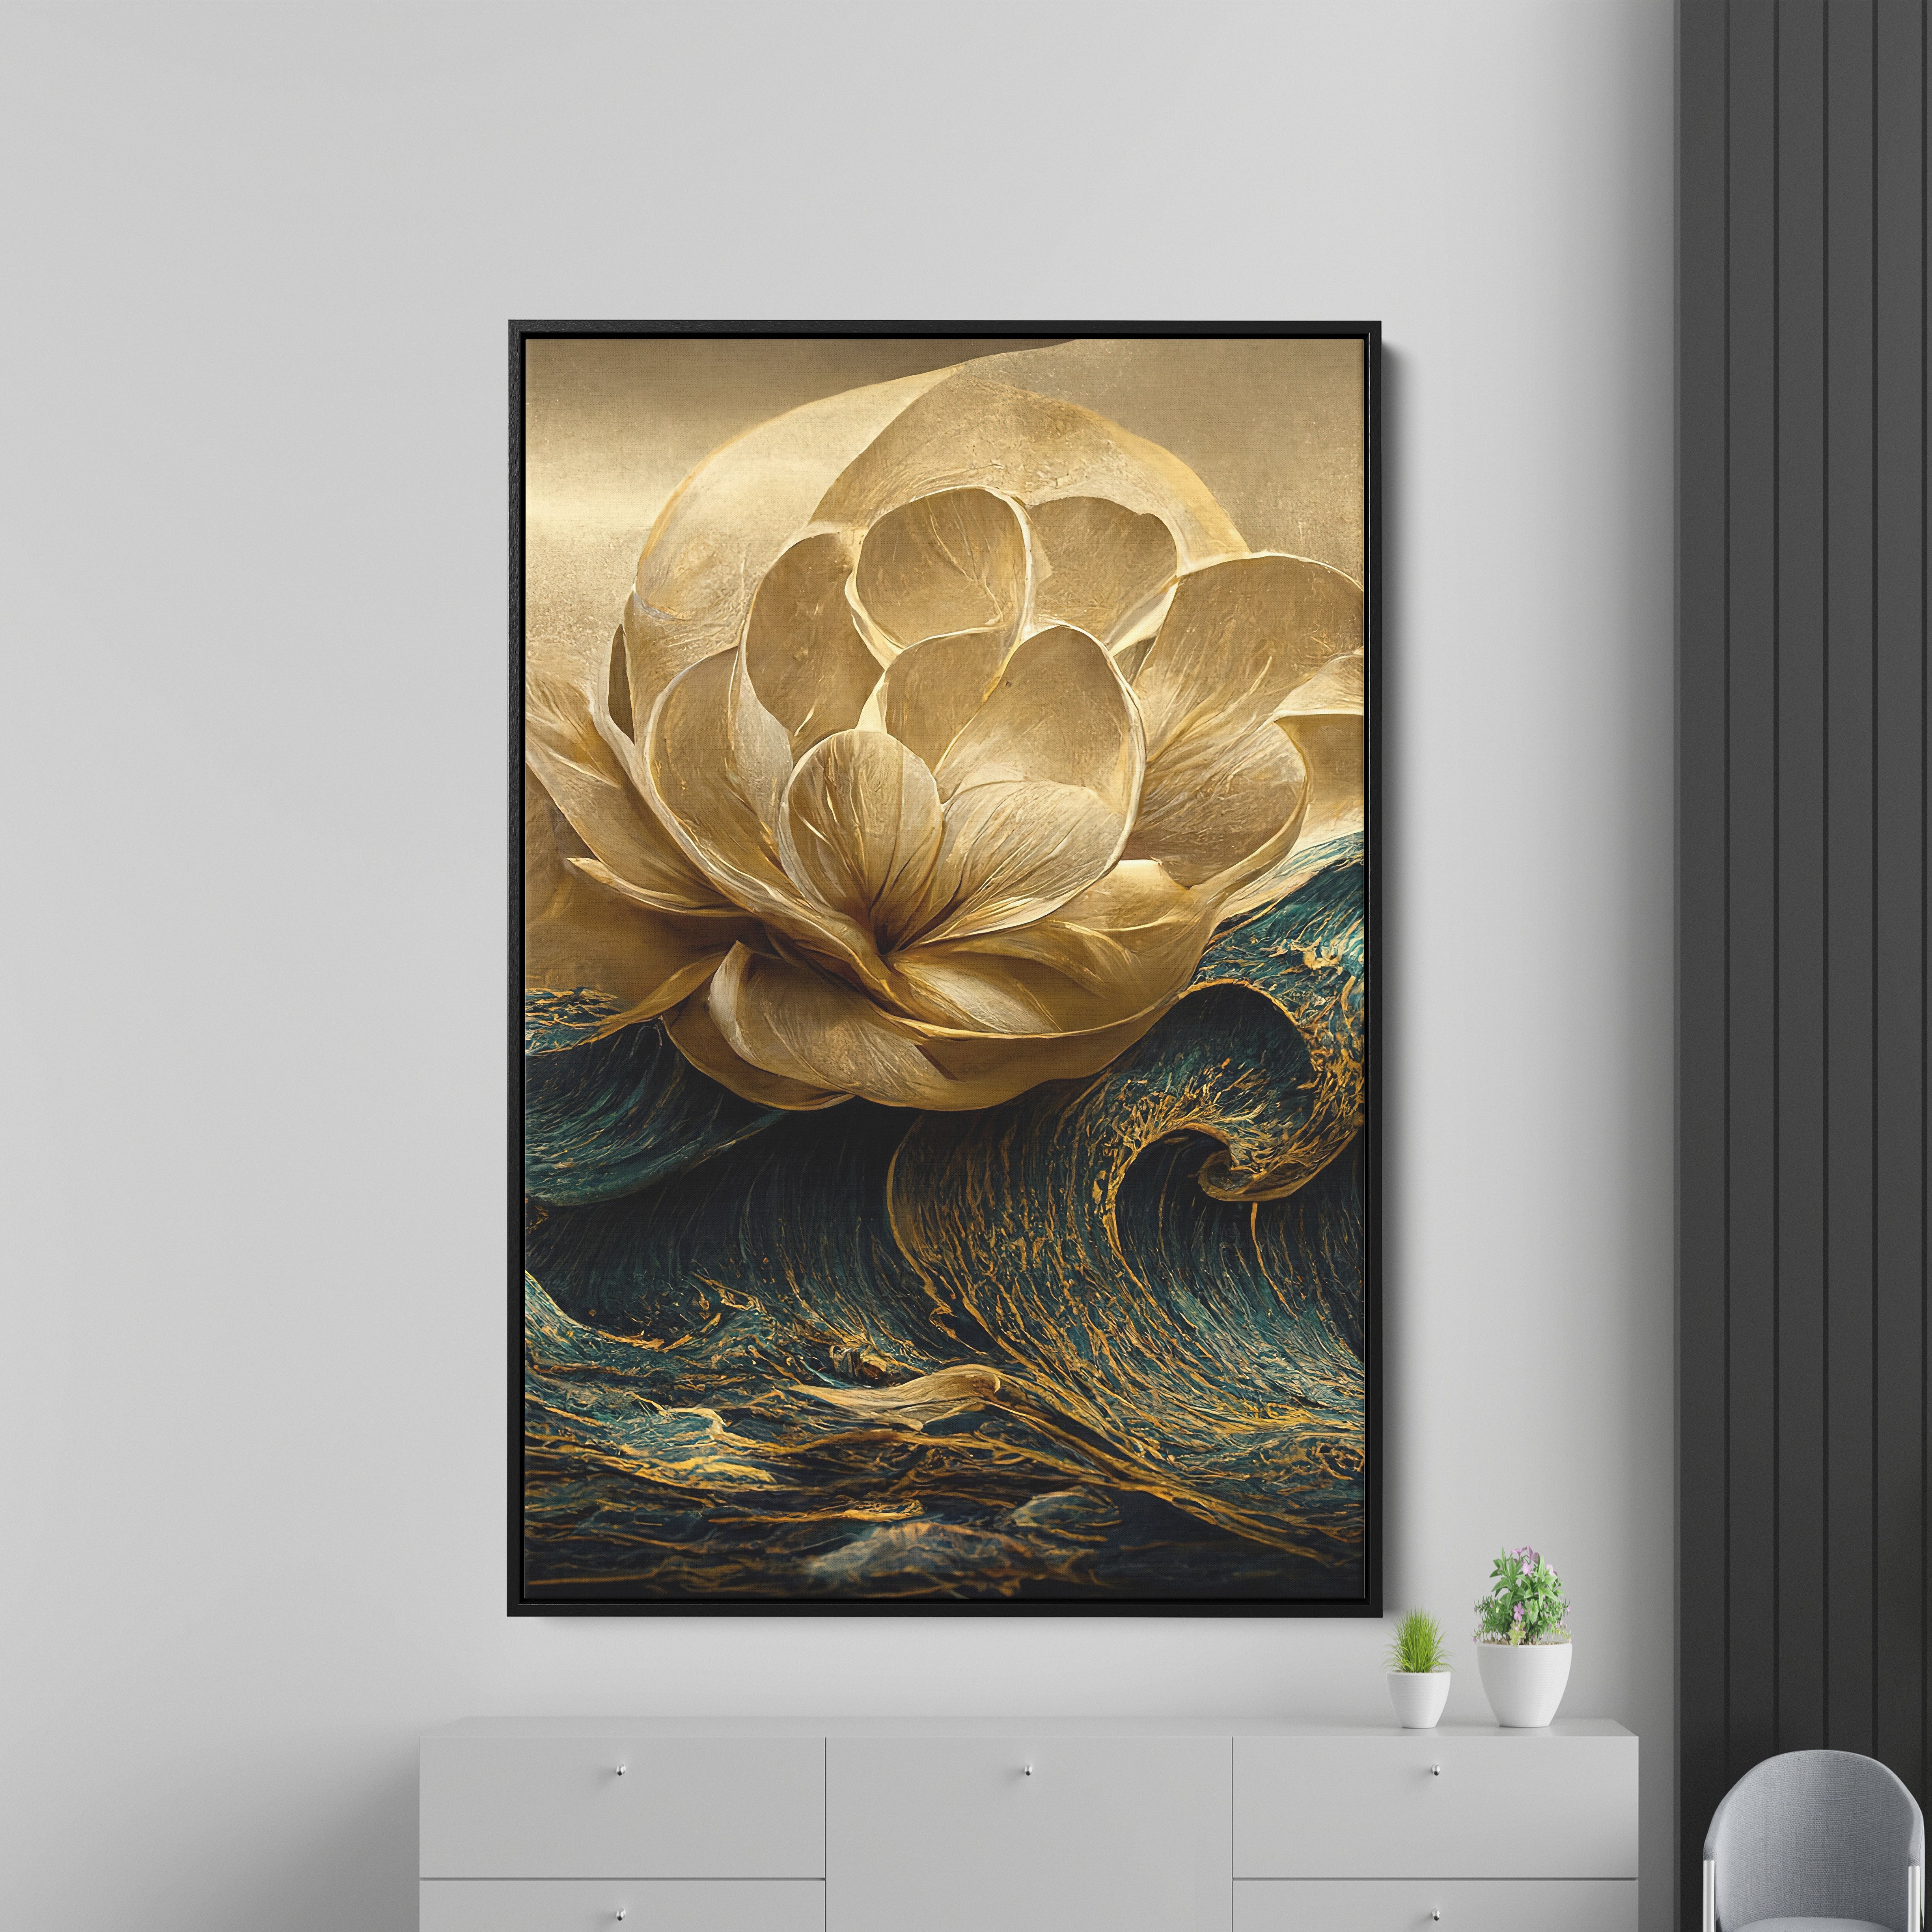 Modern Golden Flower and Waves Premium Wall Painting